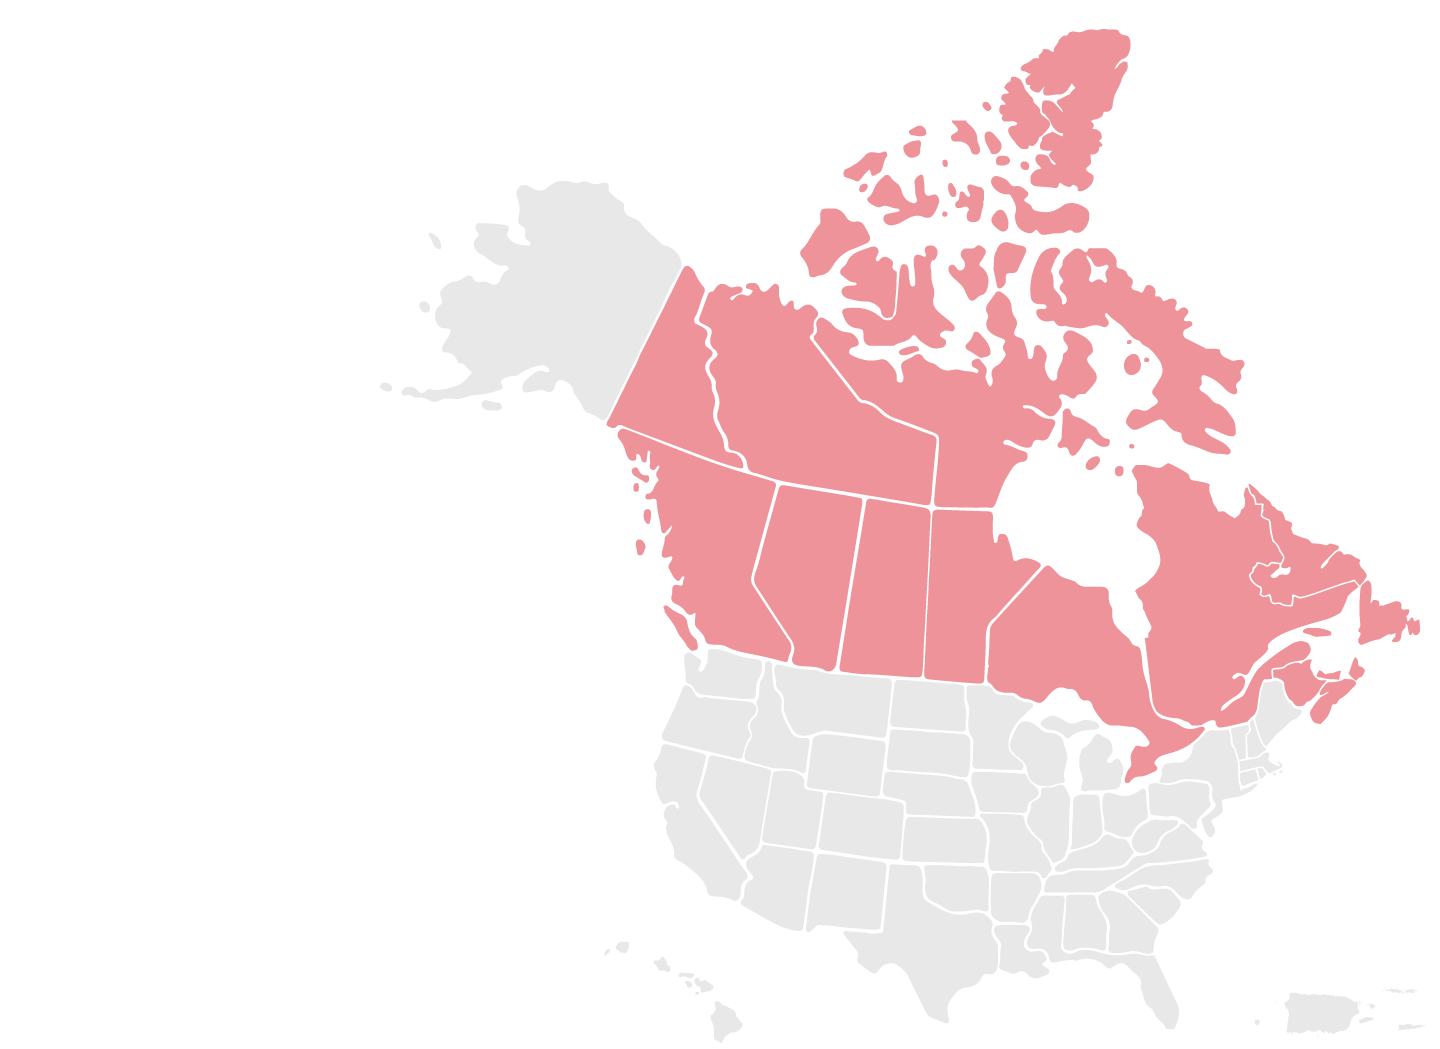 US and Canada map with all Canadian provinces highlighted in red